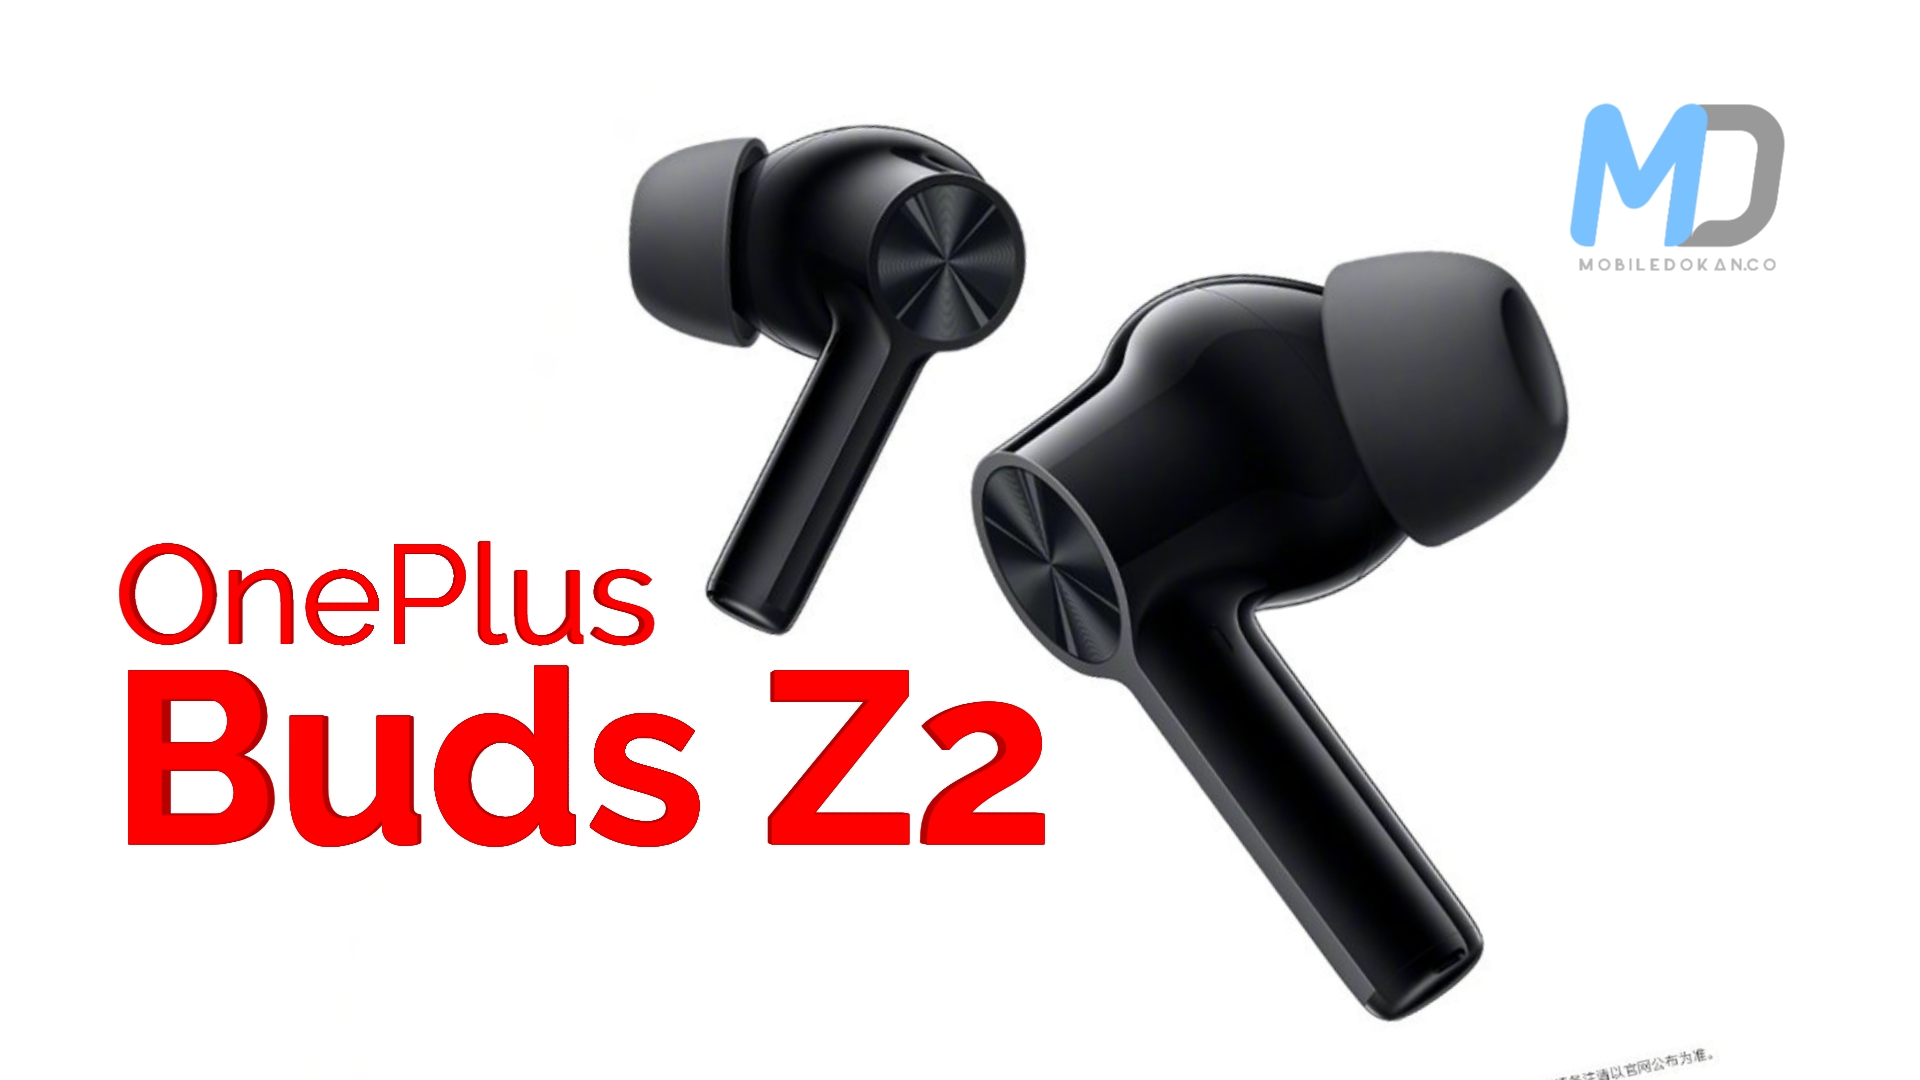 OnePlus Buds Z2 key specifications officially confirmed by OnePlus